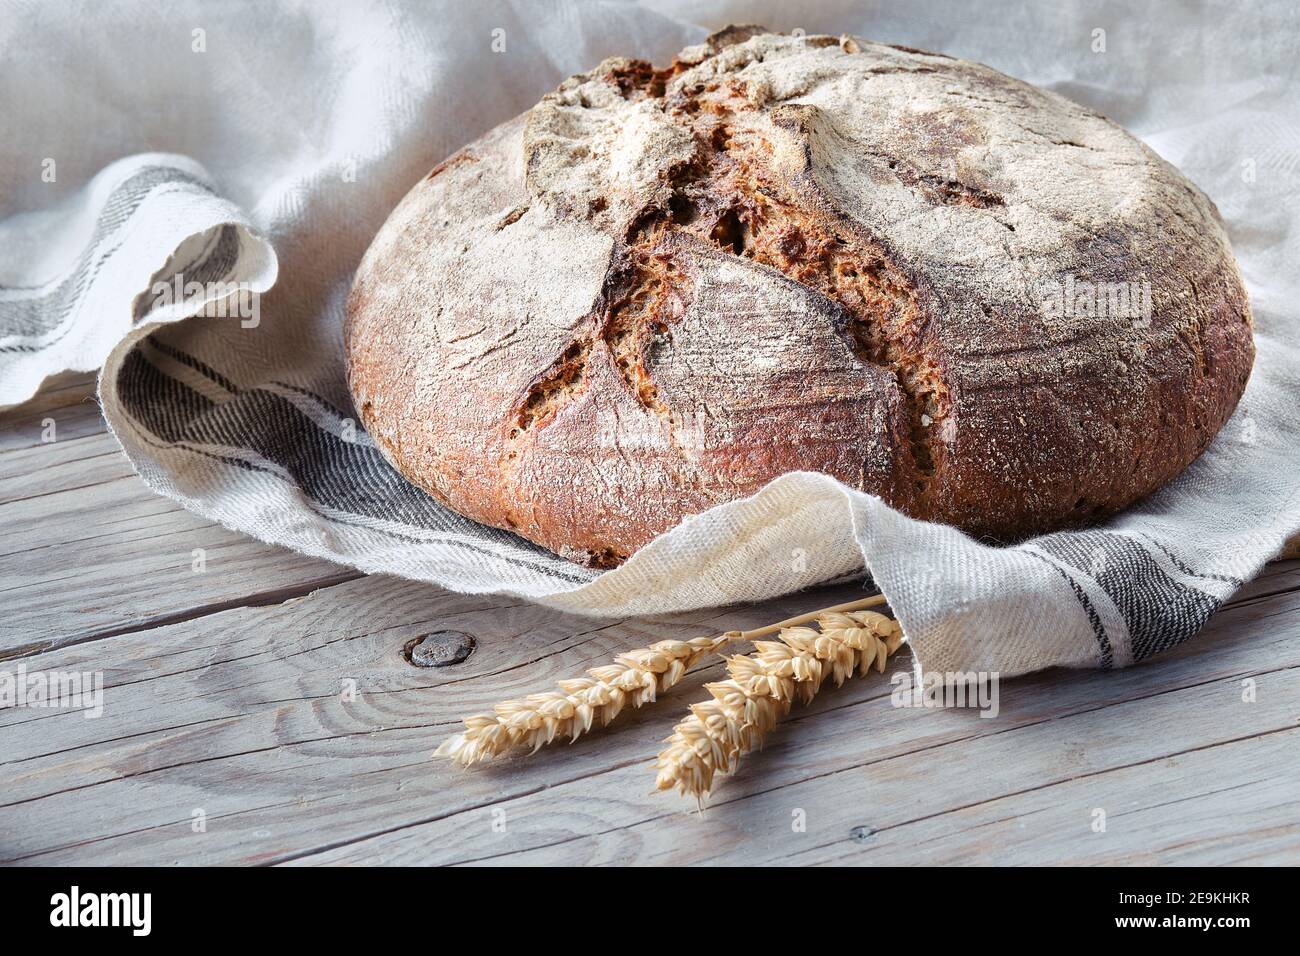 No knead handmade loaf on cutting board on wood with linen towel, spelt ears. German Bauernbrot means Rustic Farmers Bread in English. Wholemeal rye Stock Photo